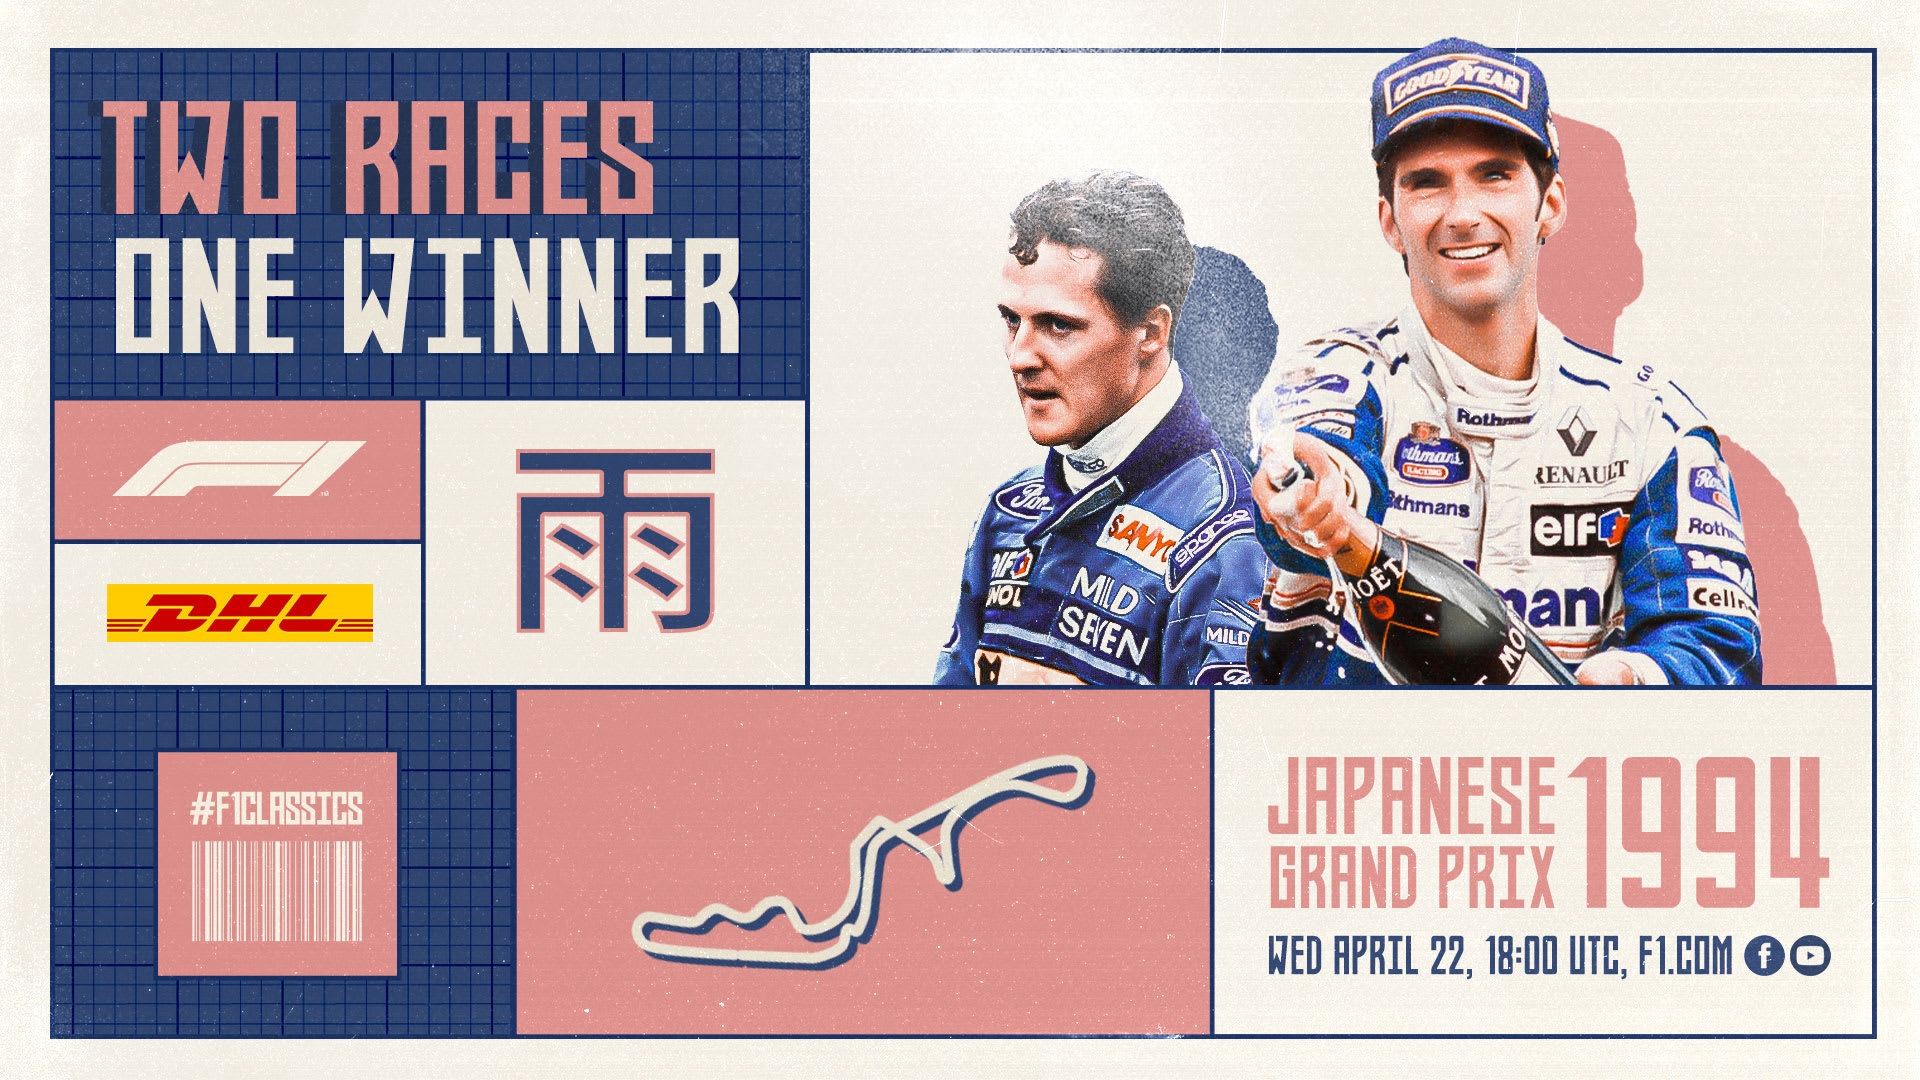 F1 1994 Japanese Grand Prix stream Heres why you should watch Formula 1®